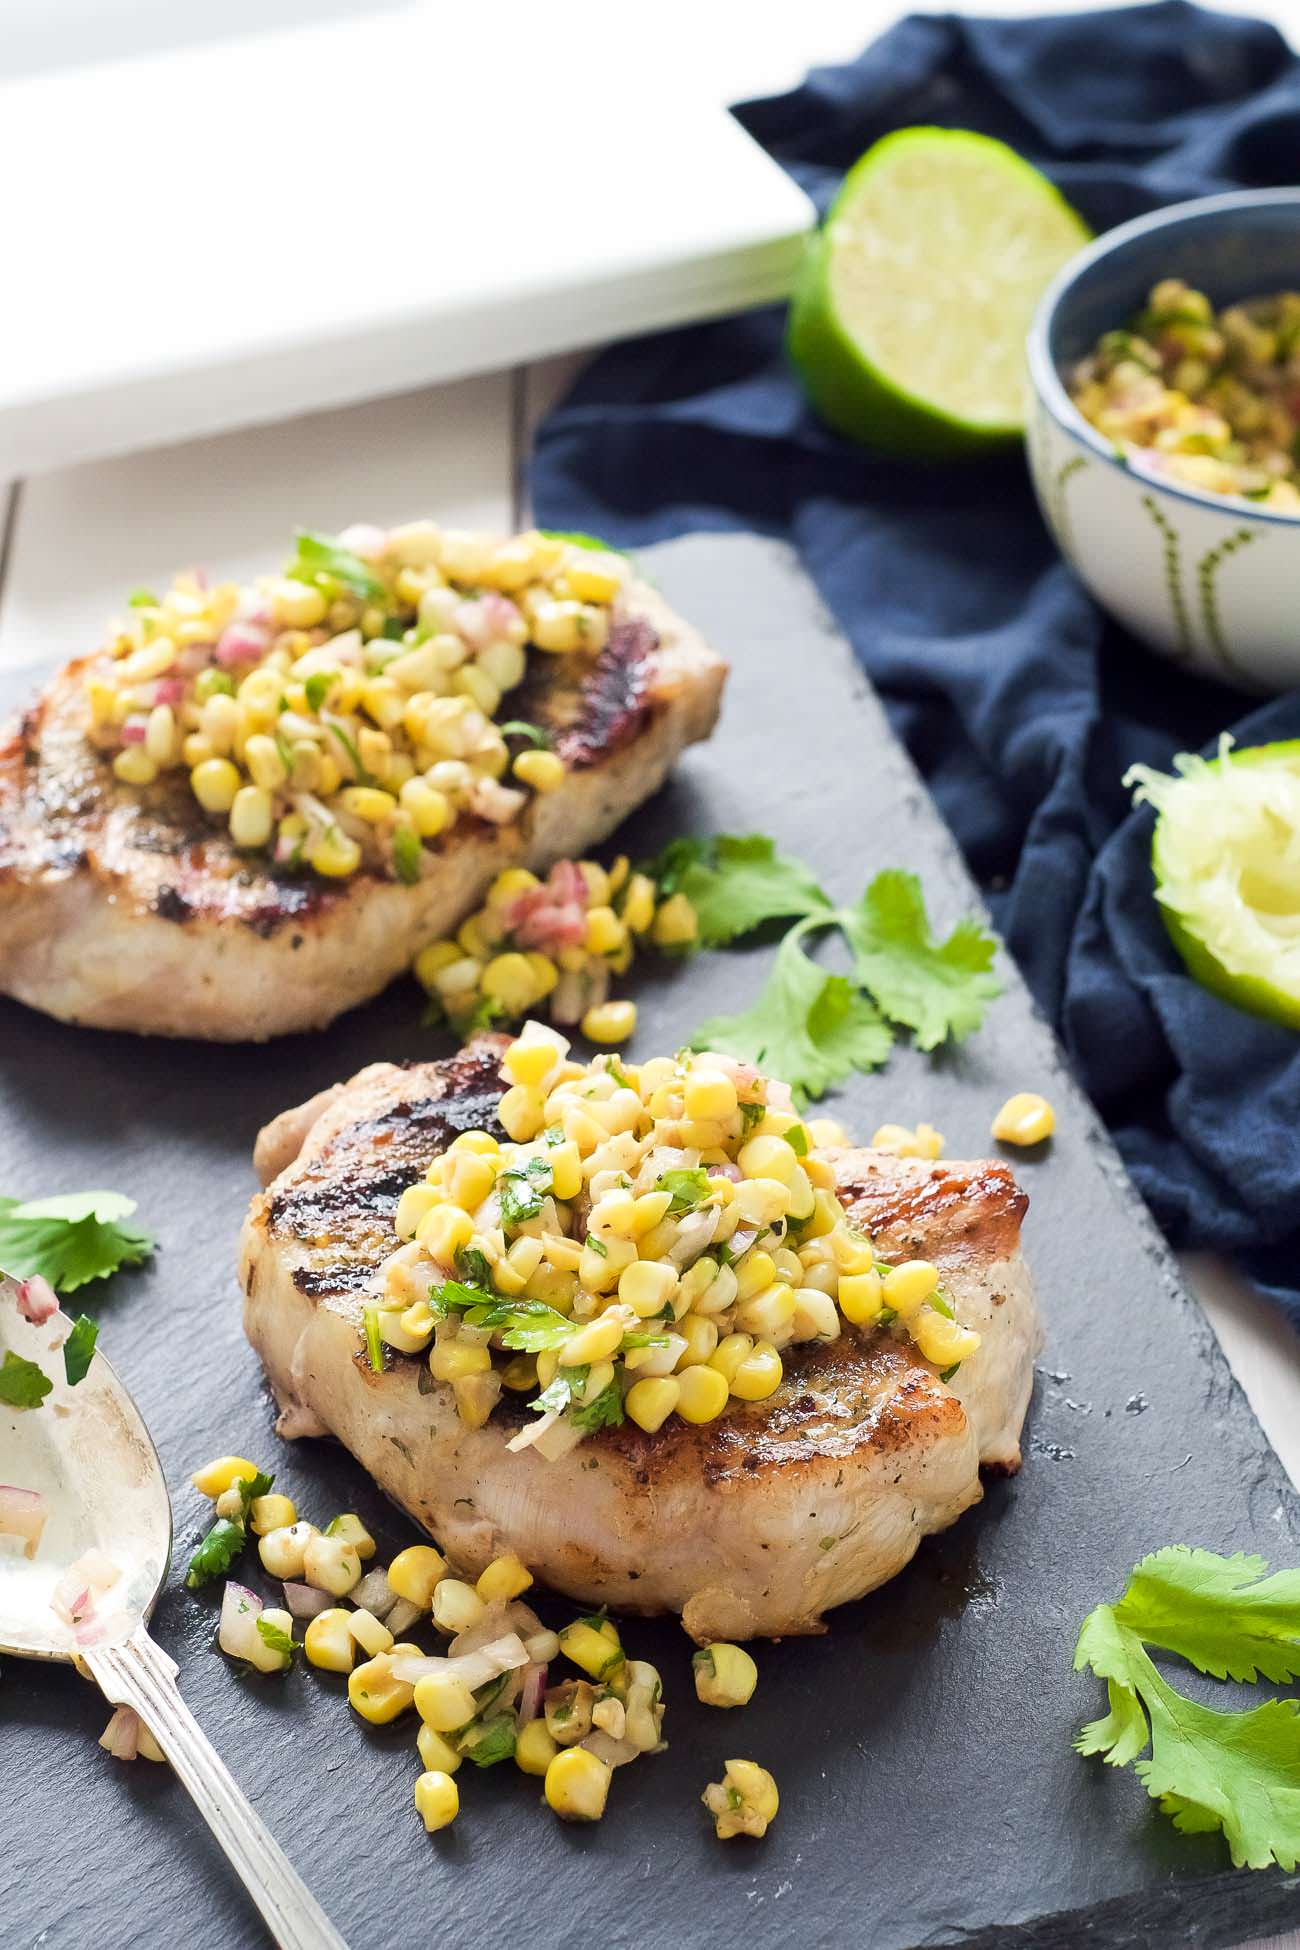 Ranch Pork Chops with Grilled Jalapeno Corn Salsa is the perfect summer dinner! Fresh crisp corn is charred to perfection, mixed with jalapenos for a spicy salsa then served with juicy, grilled ranch pork chops! 